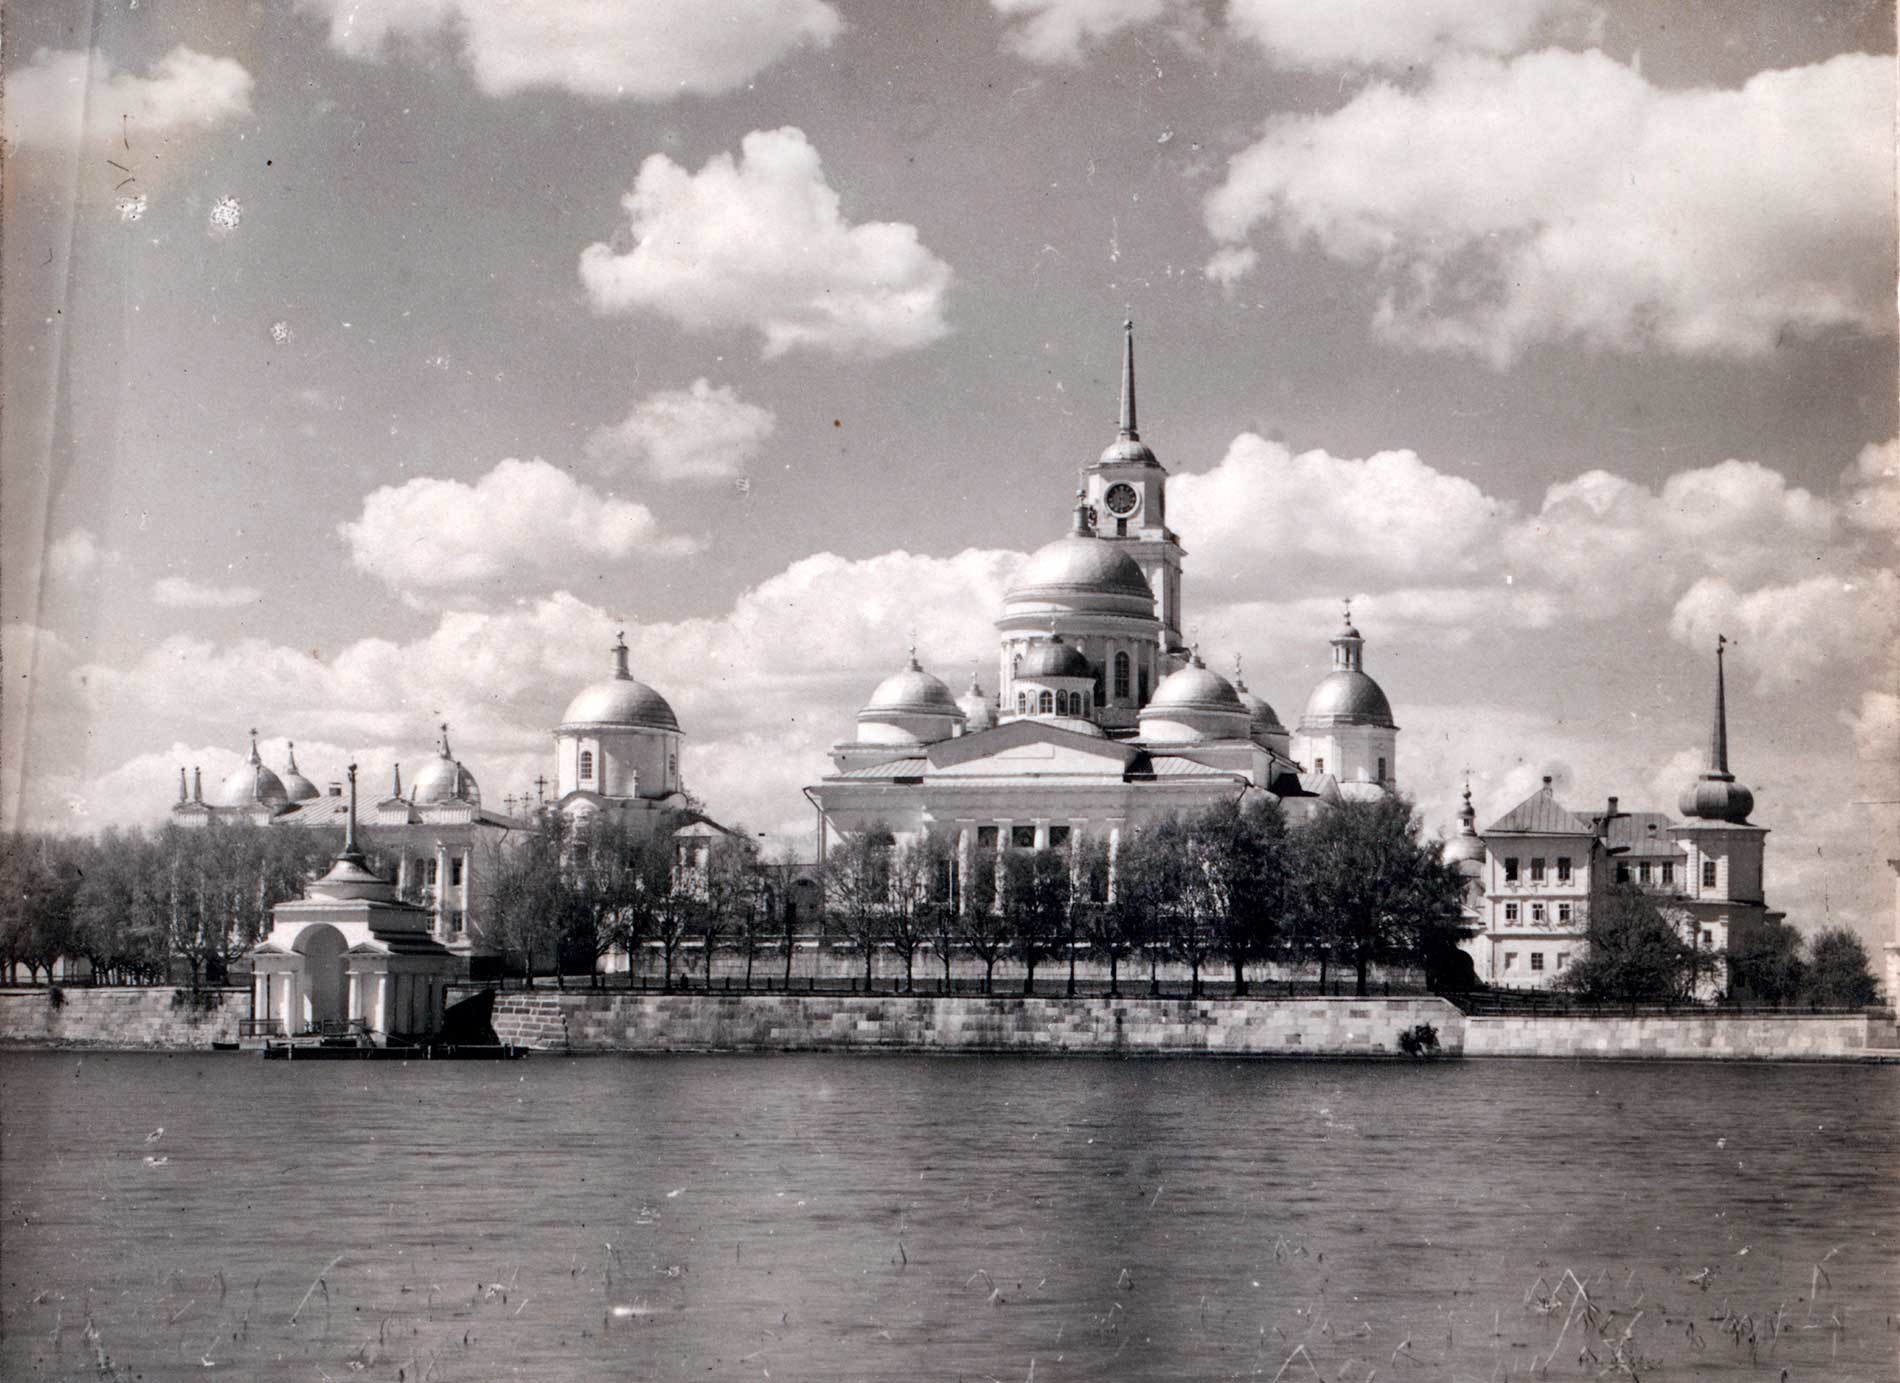 Nilova Pustyn, east view from small island. From left: Archbishop's Landing, Archbishop's Chambers, Church of St. Nilus Stolobensky over East Gate, Epiphany Cathedral&bell tower, Church of SS. Peter&Paul over West Gate, Church of All Saints, Refectory. Summer 1910.